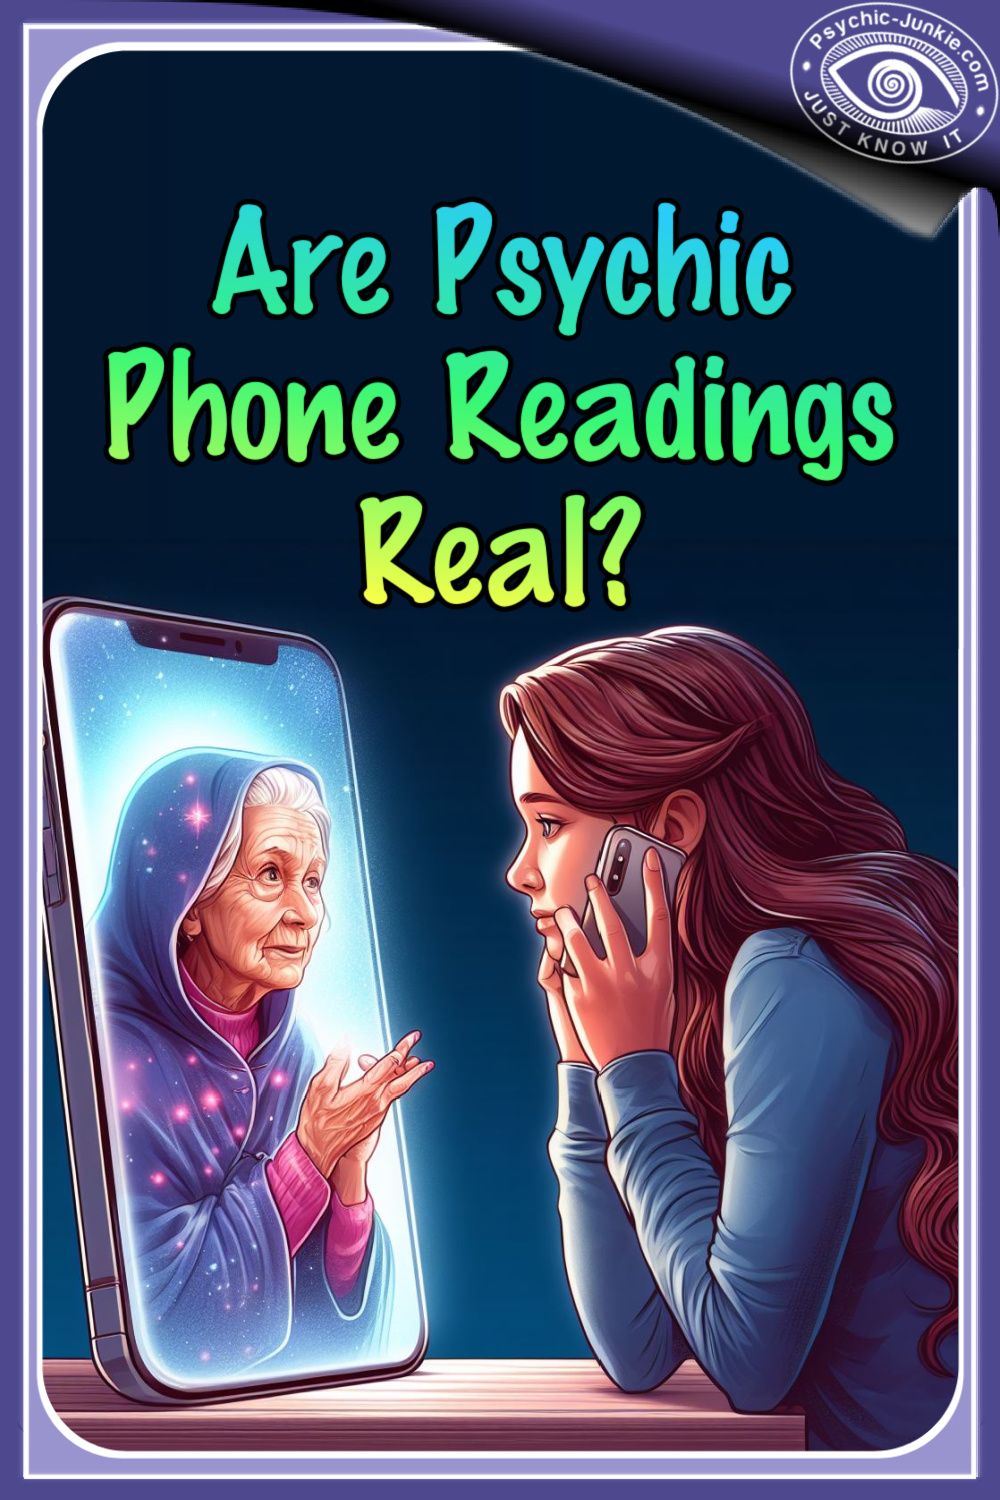 Are Psychic Phone Readings Real?